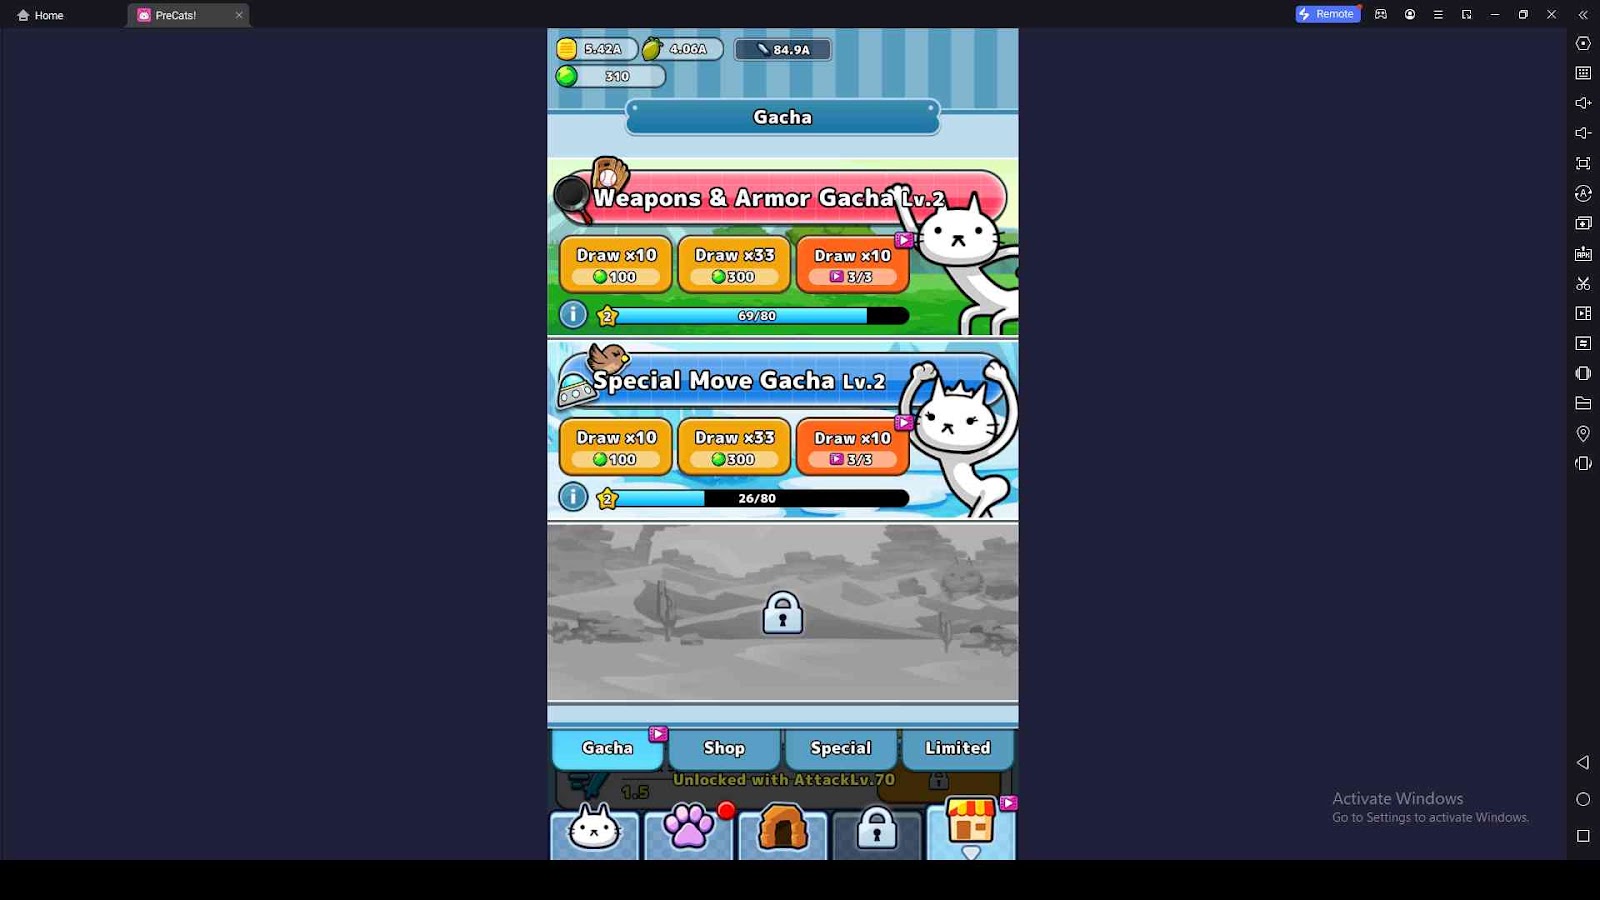 Learn About the Gacha in PreCats! - Idle Cat Raising